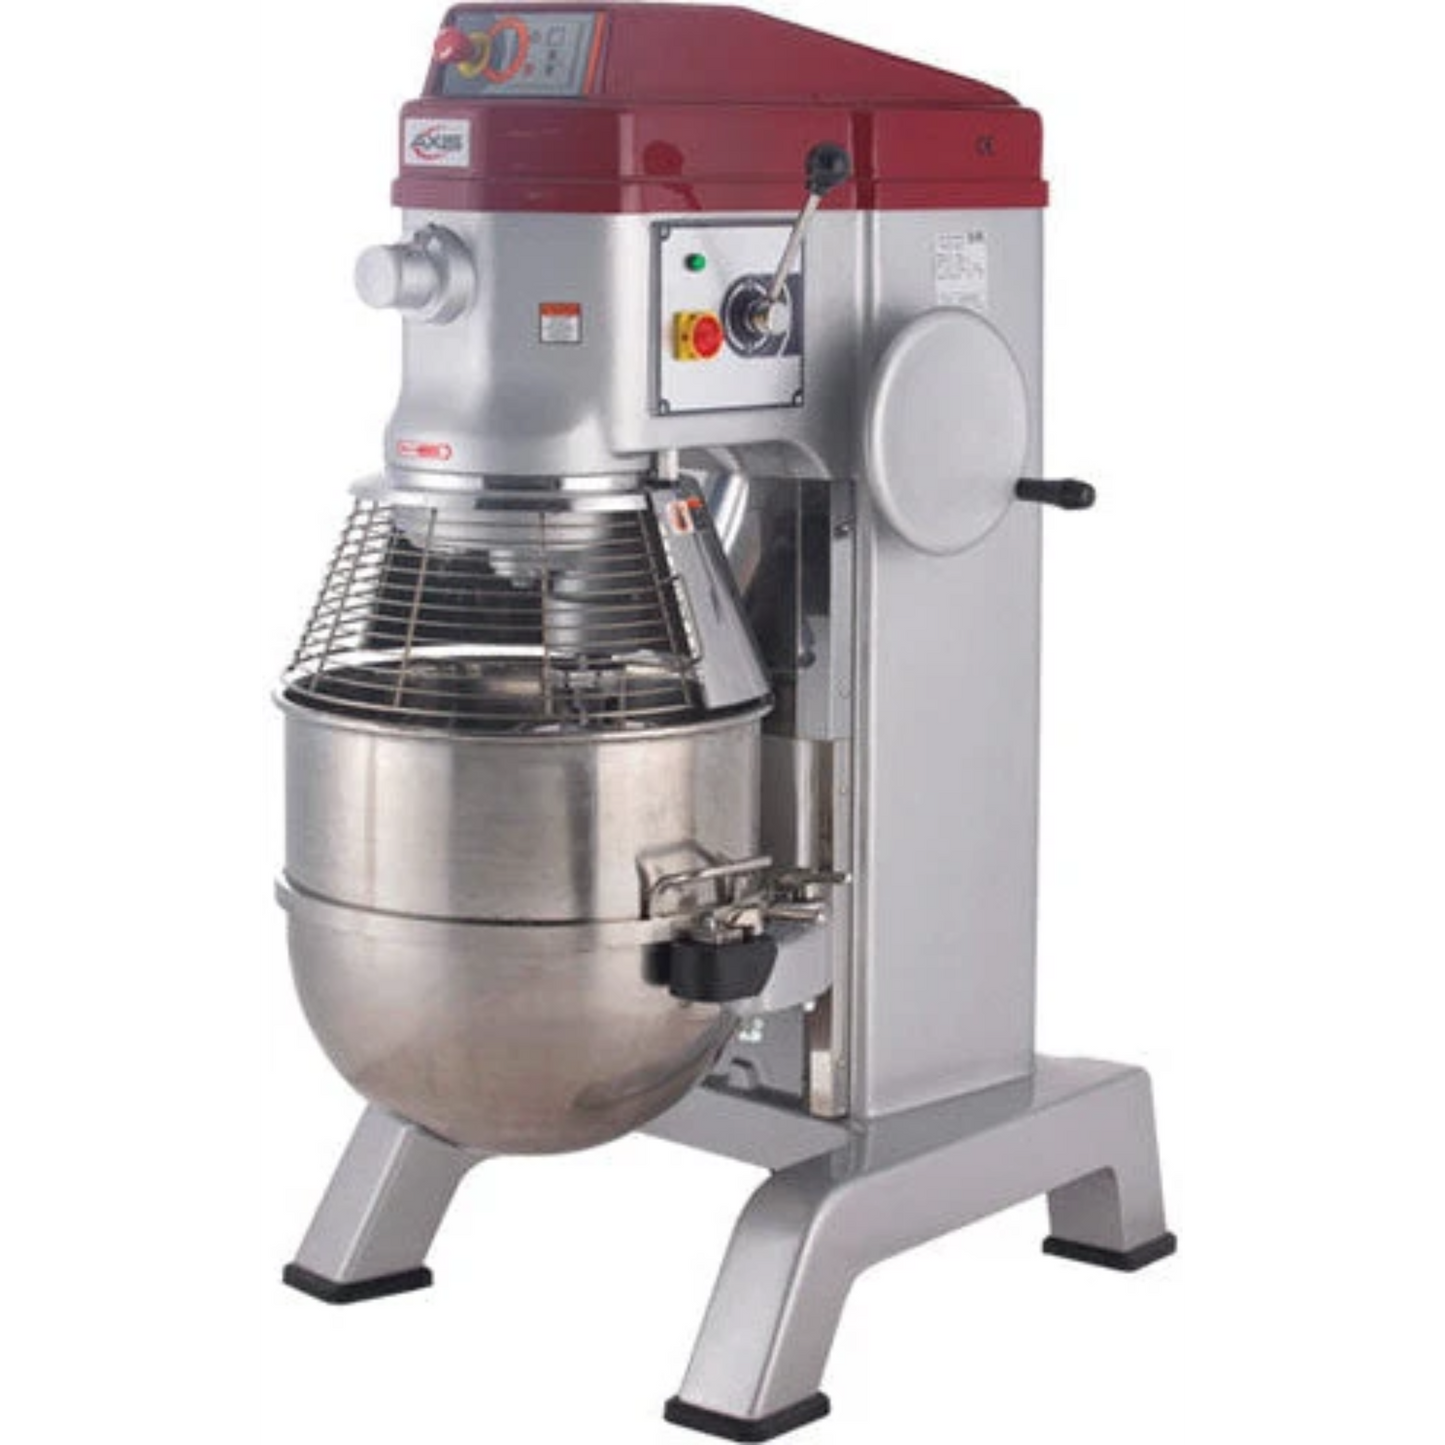 Axis AX-M60 Floor Model 60 Quart Planetary Mixer with Timer, 3-Speed, 3 HP